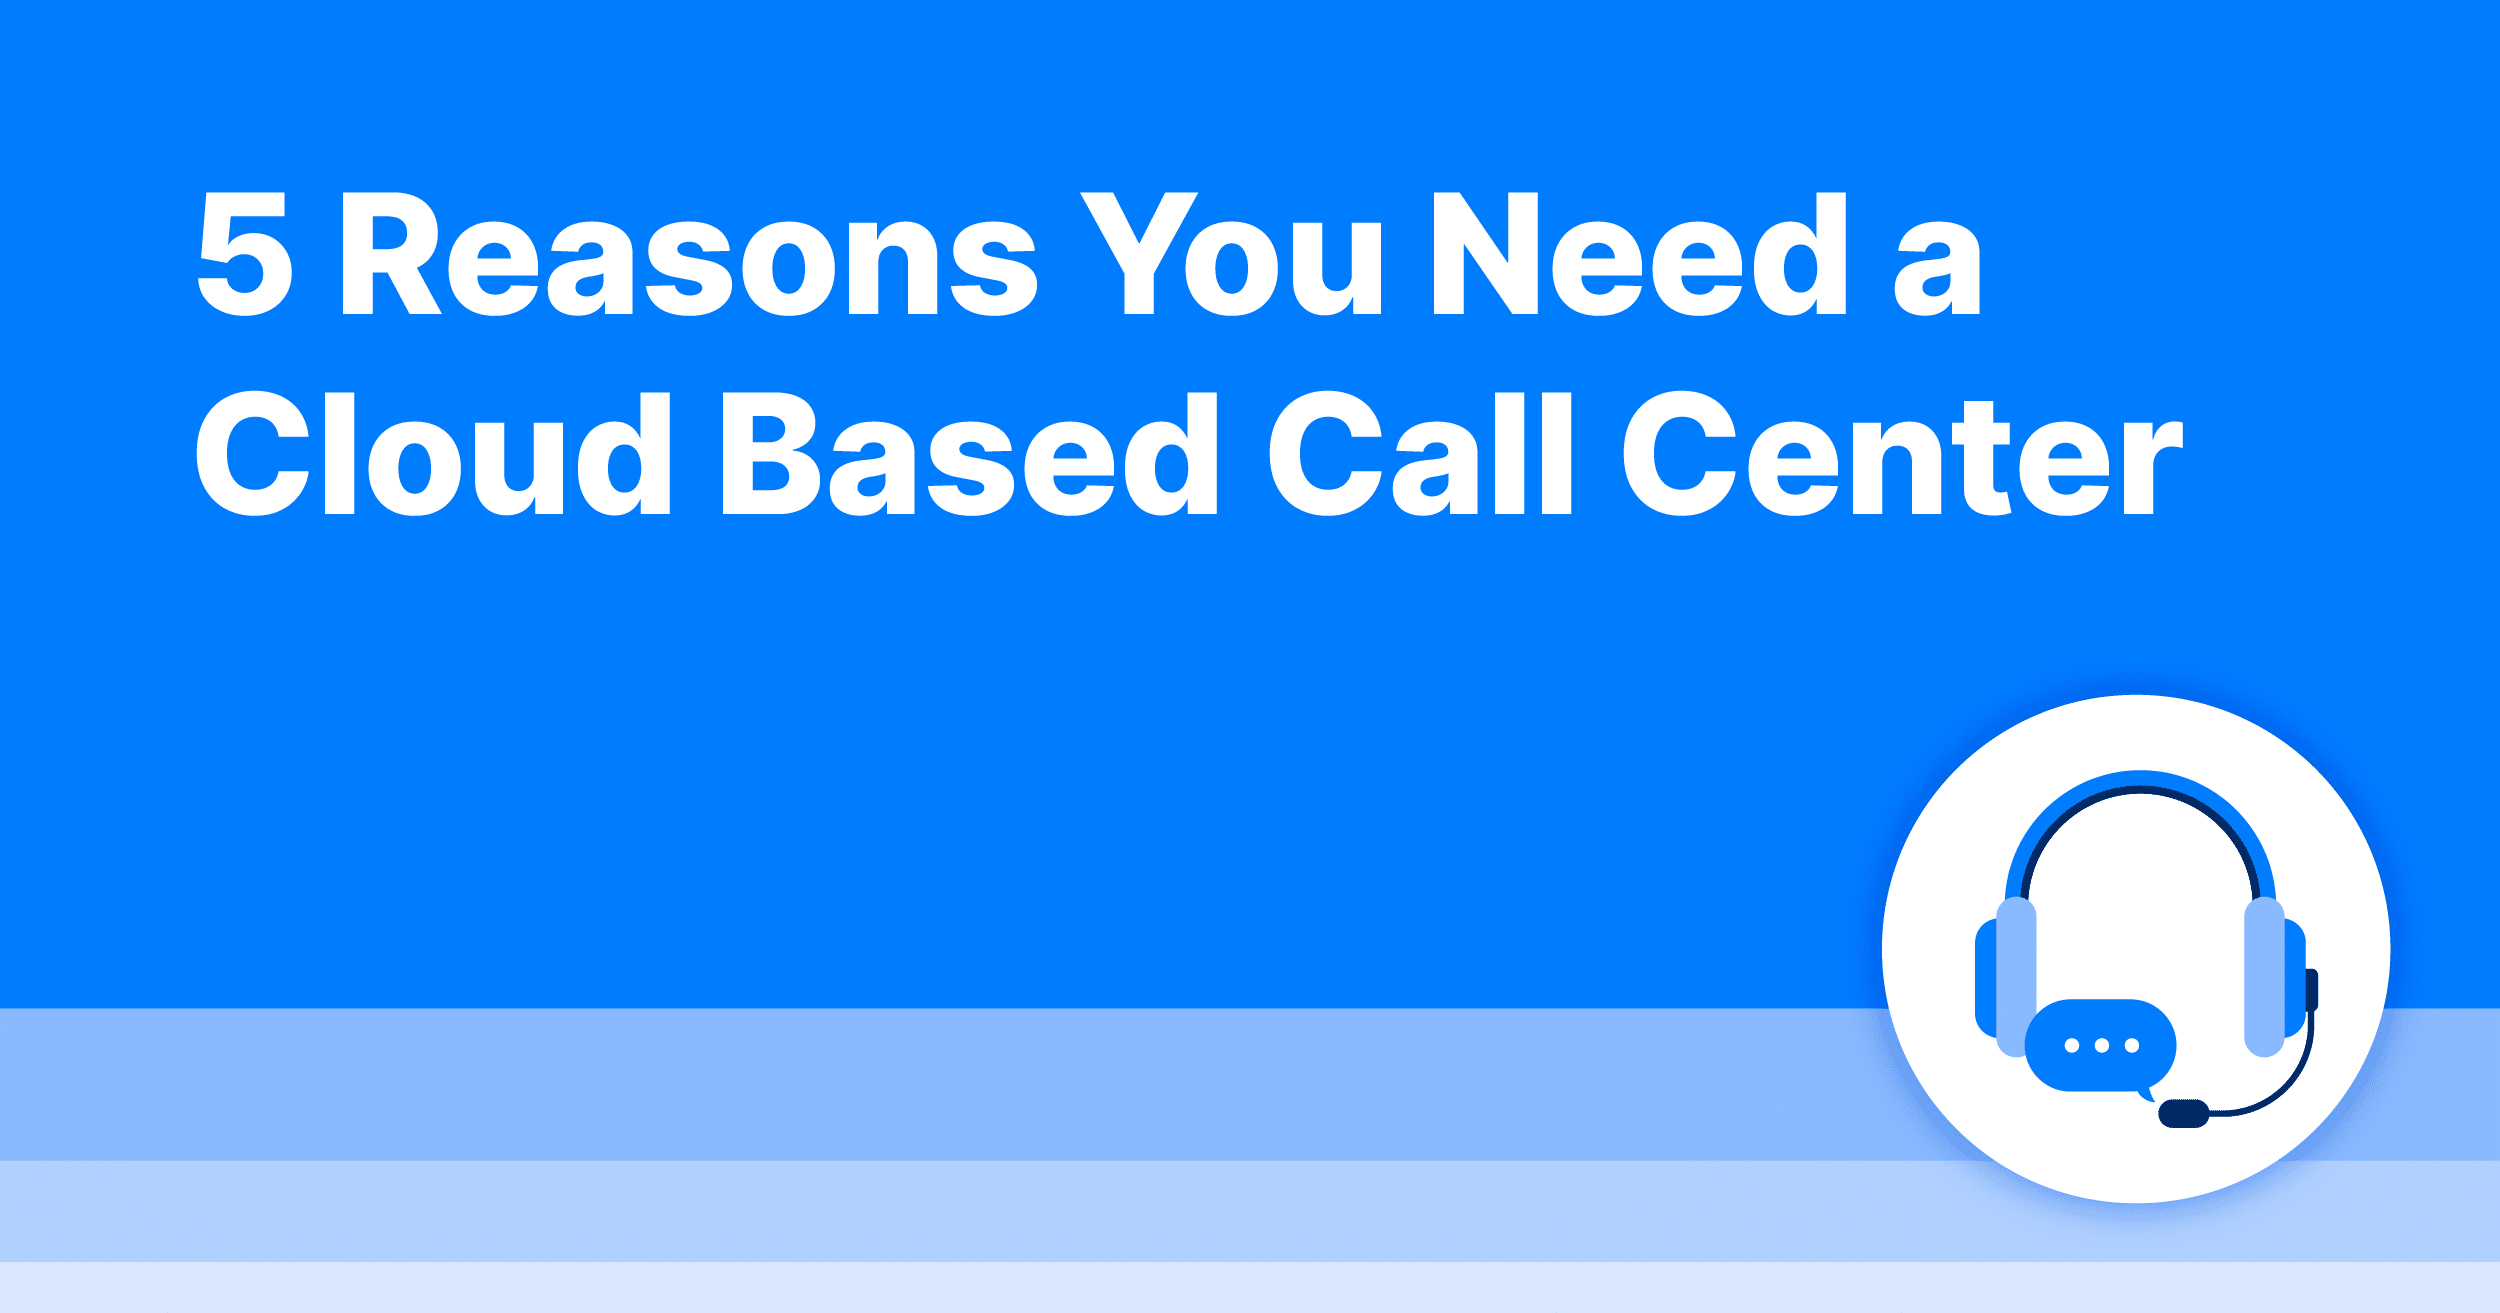 5 Reasons You Need a Cloud Based Call Center